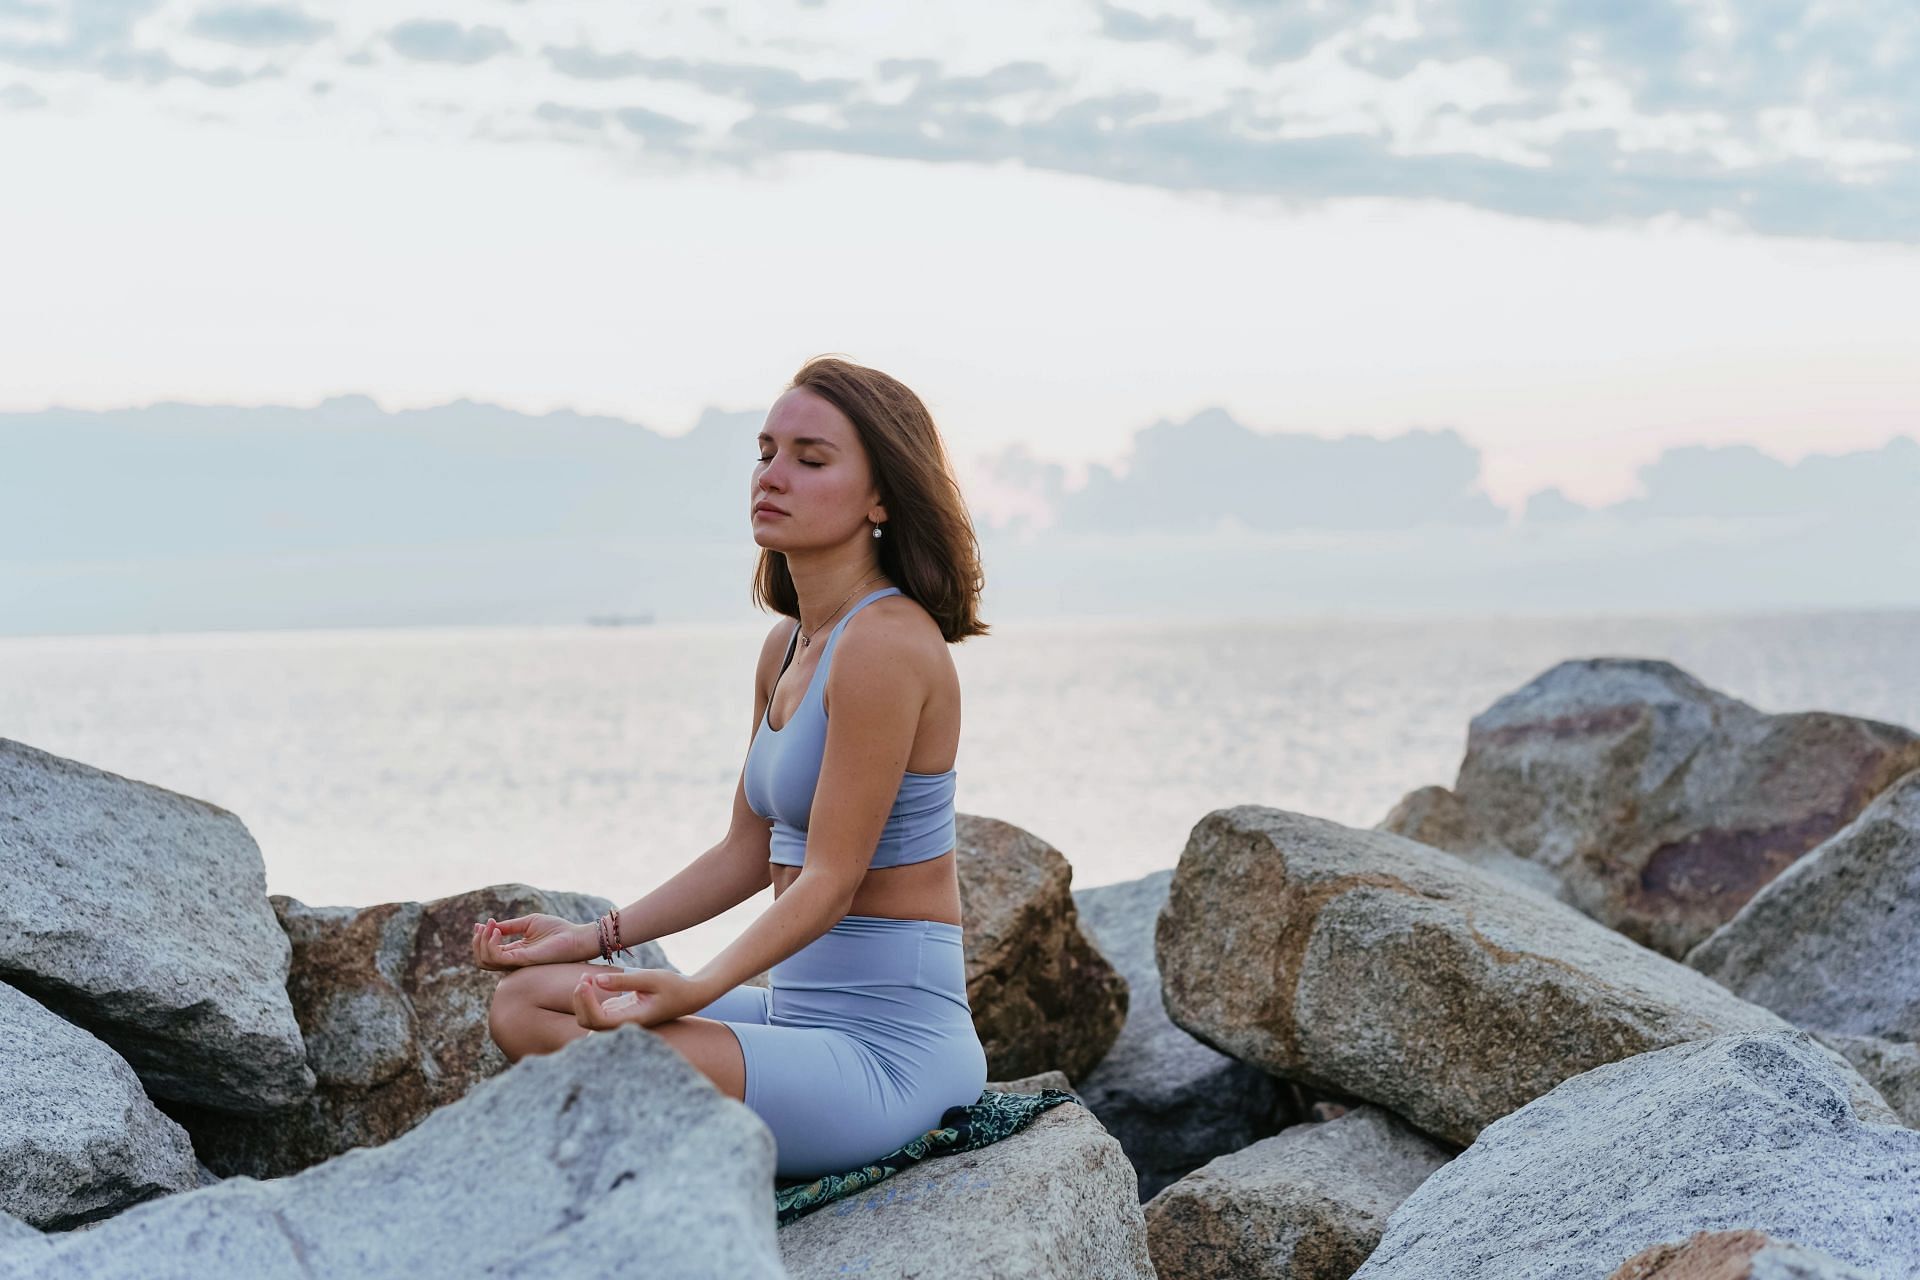 Restorative yoga is a great way to heal and relax your mind. (Image via Pexels / Olia Danilevich)